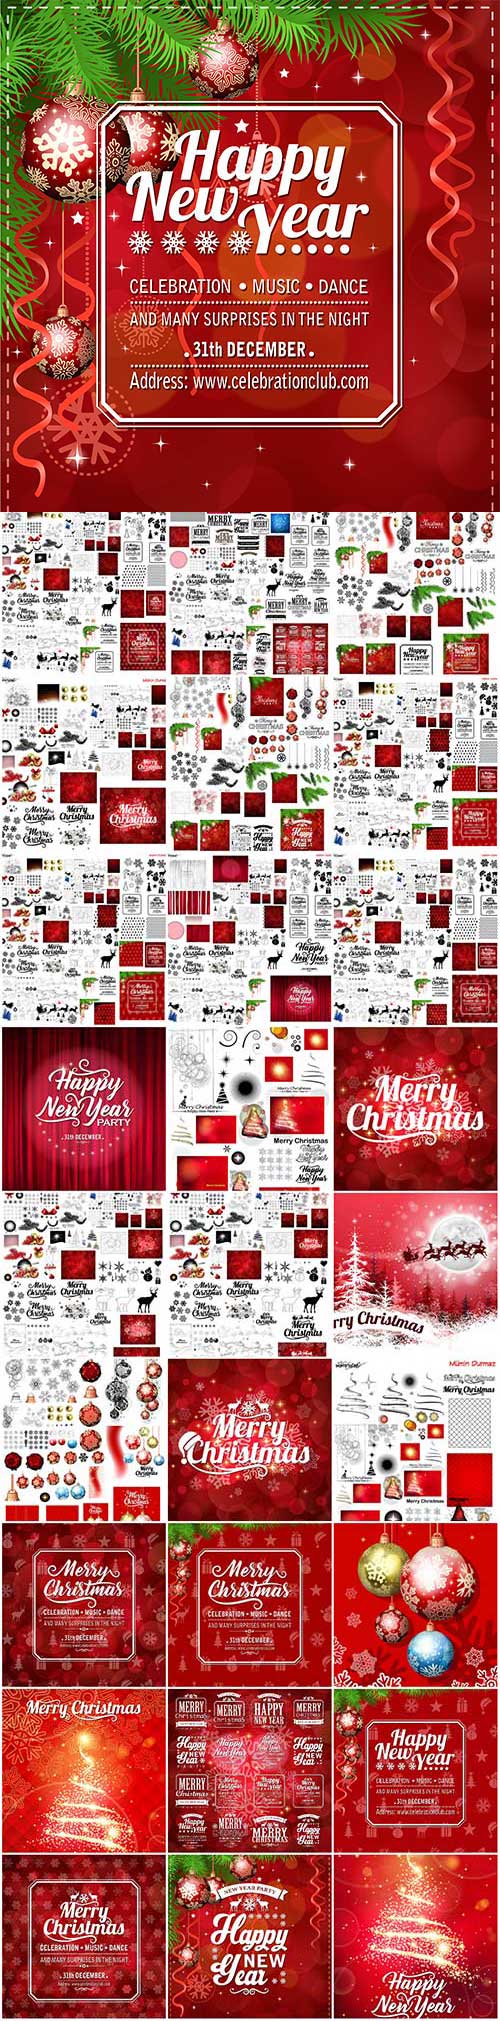 New Year and Christmas vector vol 11